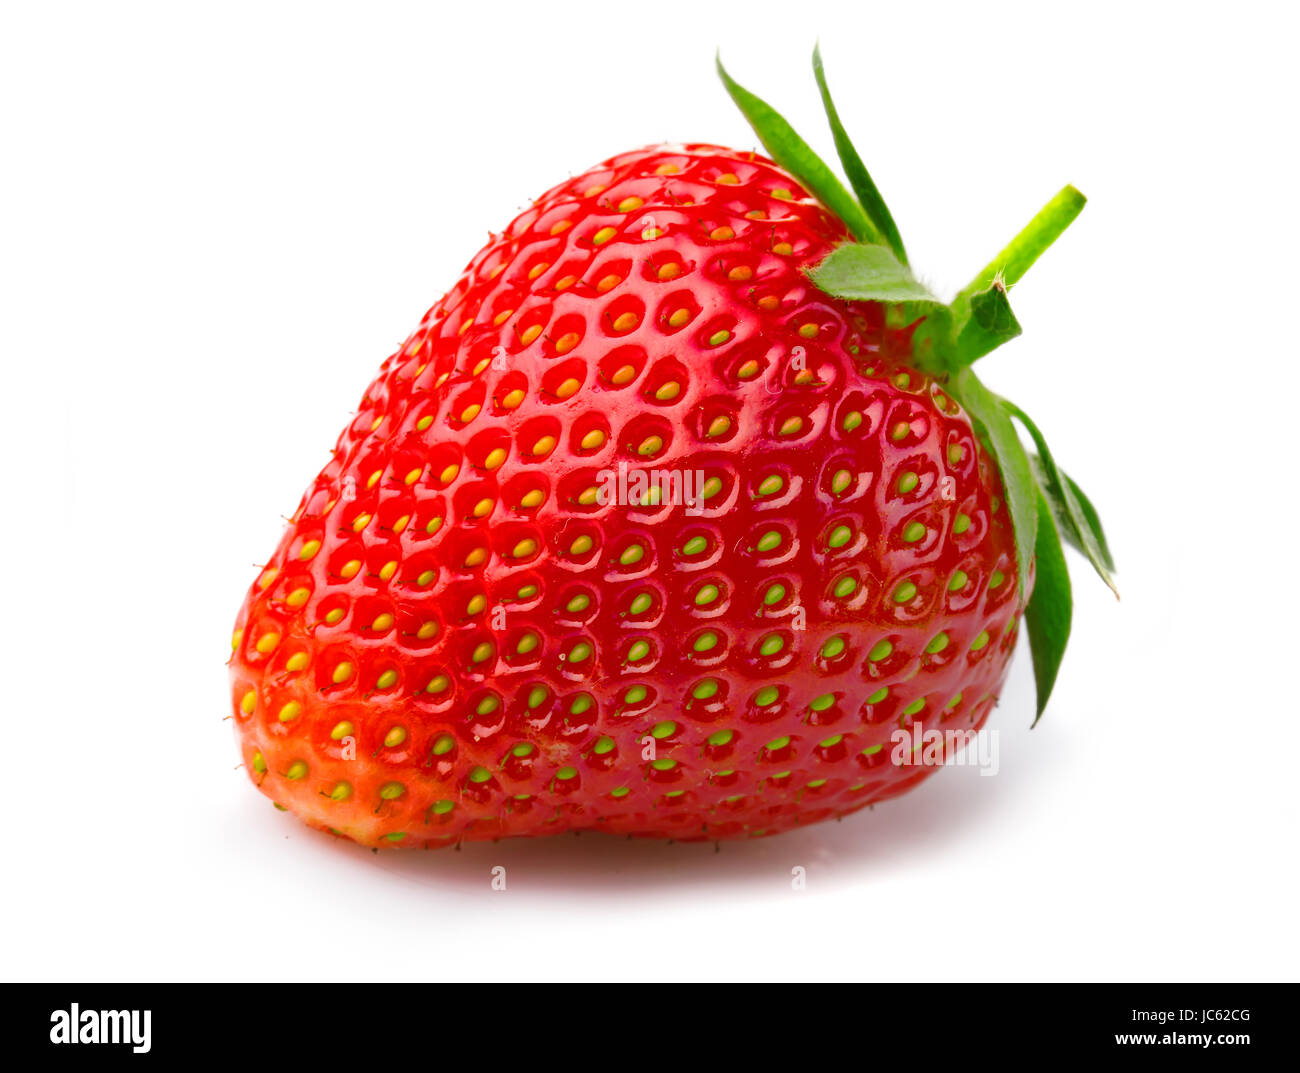 Ripe strawberry with leaves isolated on a white background Stock Photo